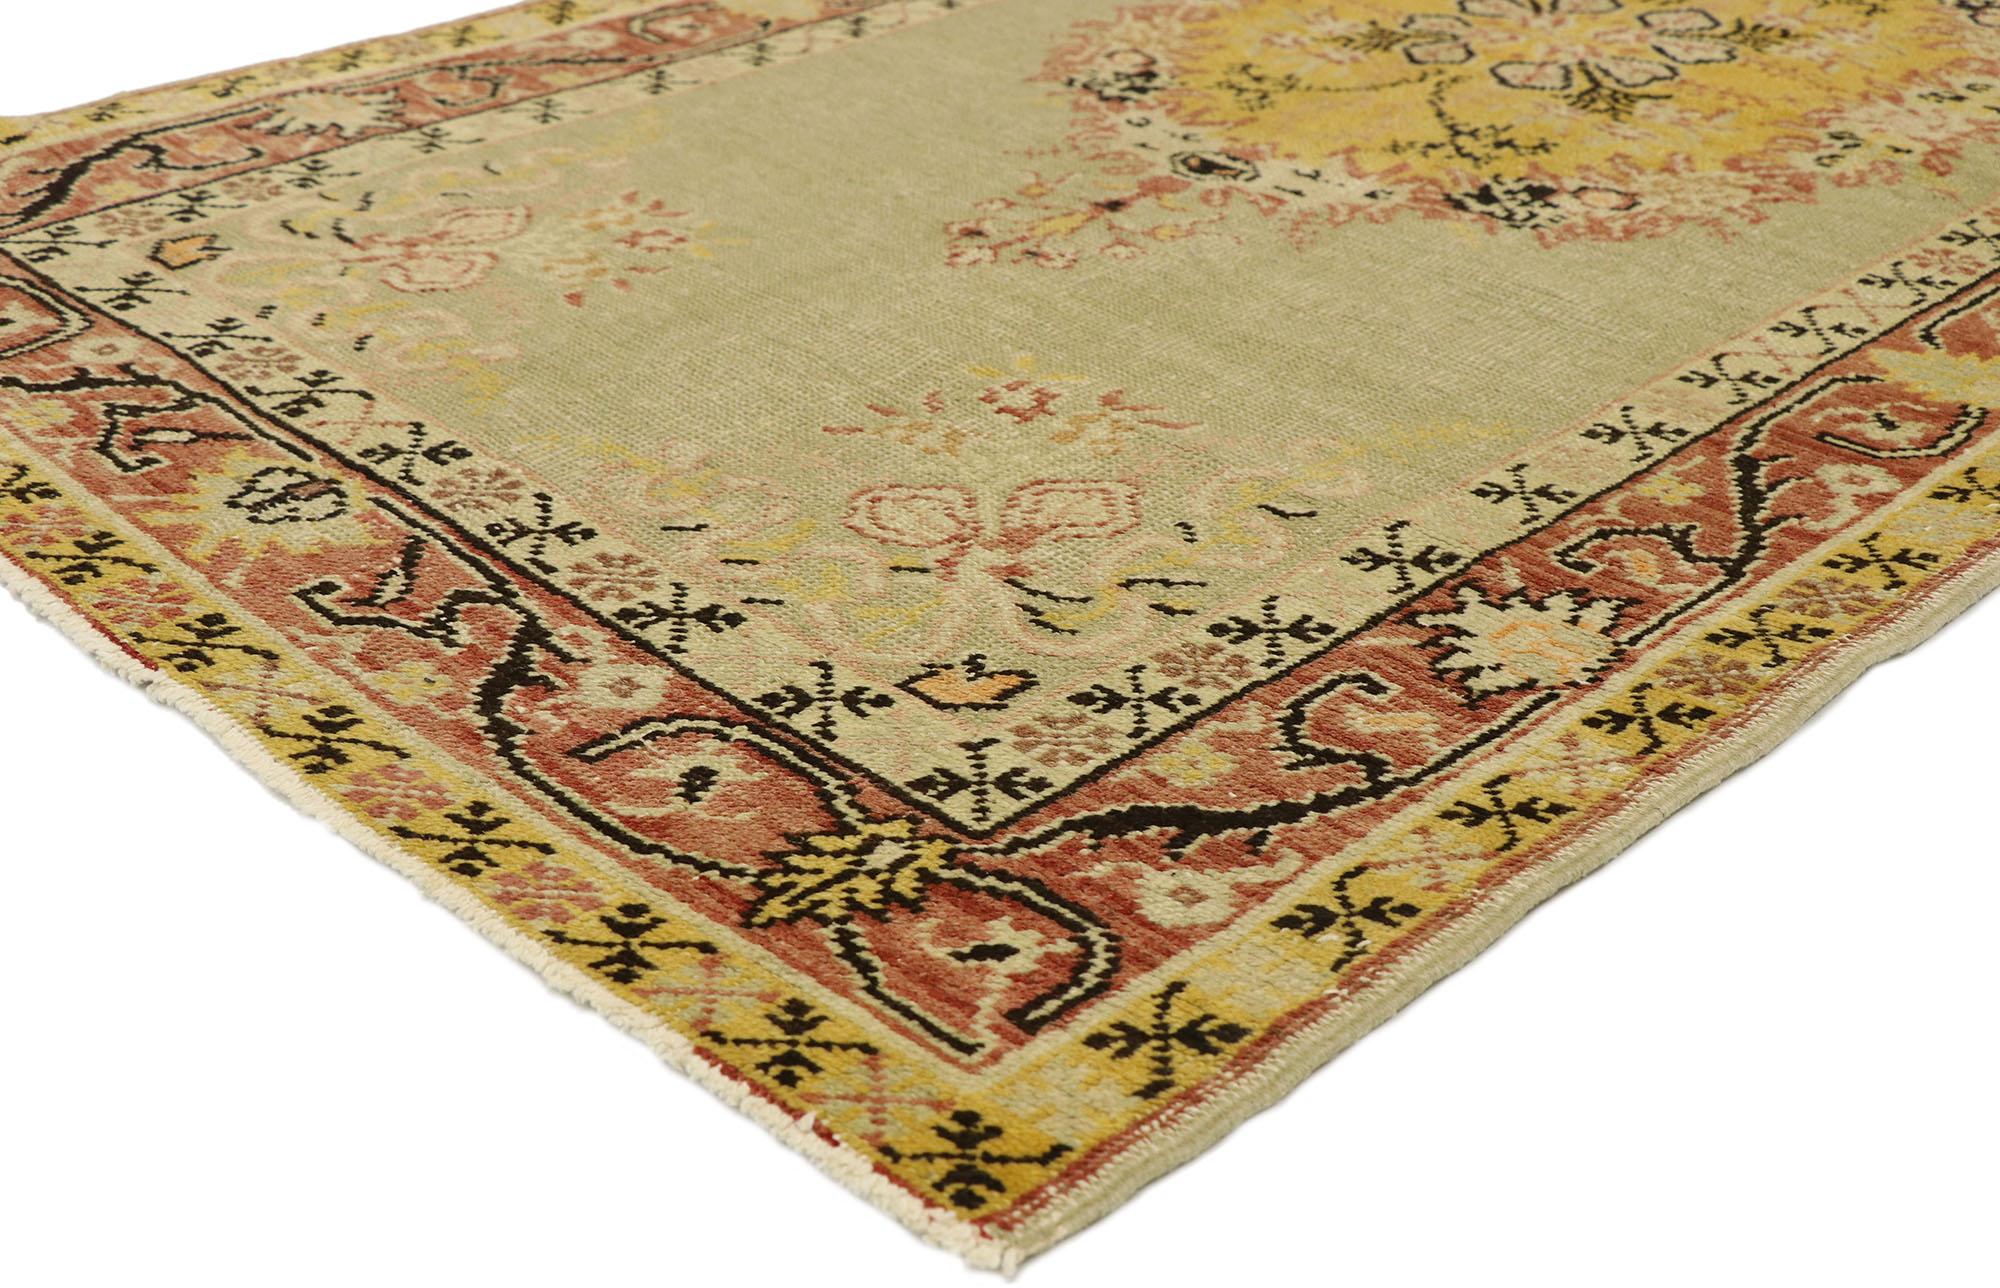 73785 Distressed Antique Turkish Oushak Rug, 03'05 X 06'05. This classic-style hand-knotted wool antique Turkish Oushak rug merges French Provincial and Rococo Romanticism with timeless Anatolian tradition. The design features an elaborate